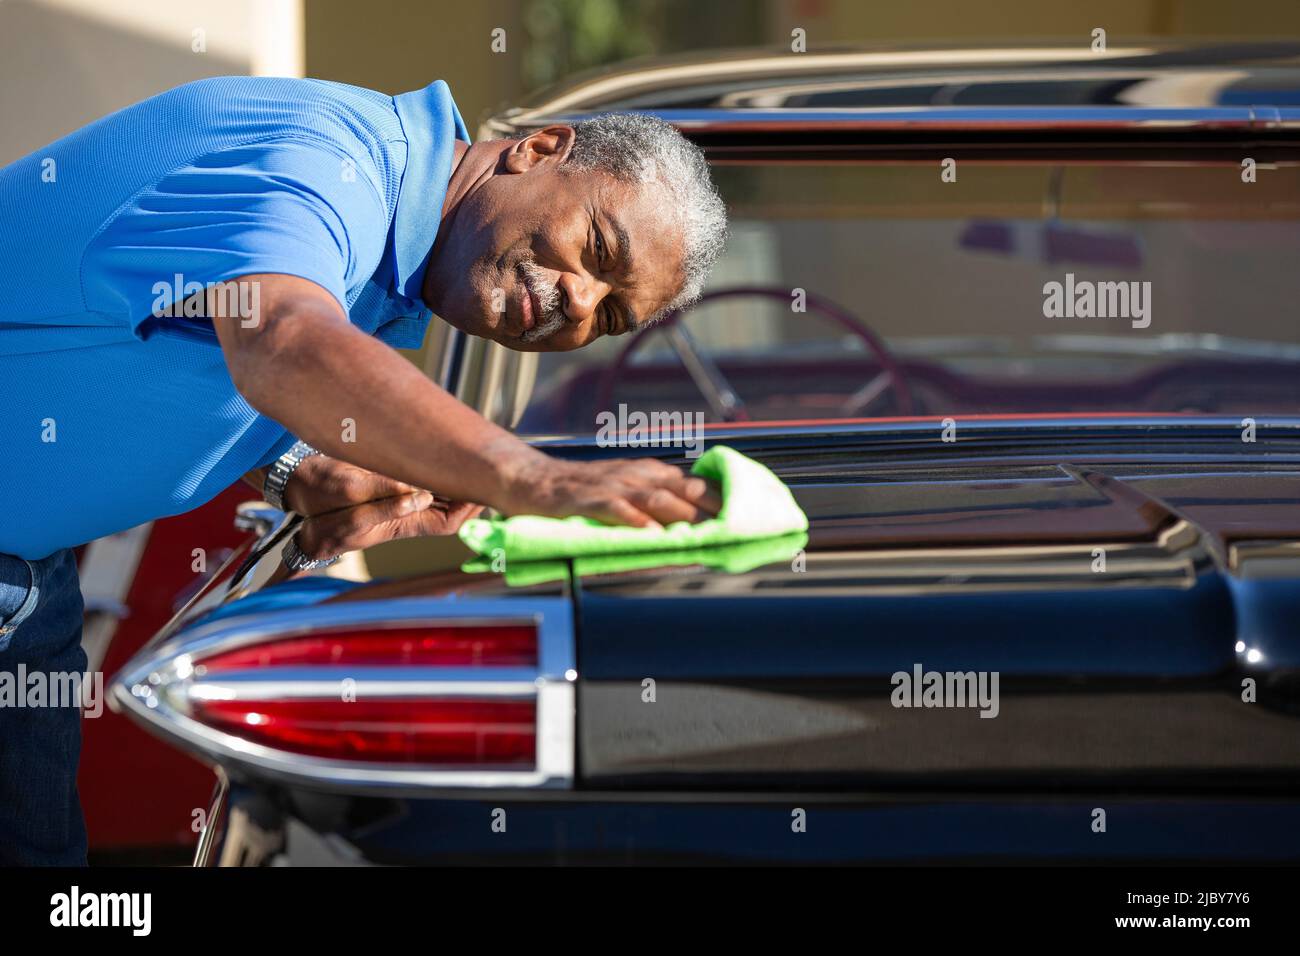 Older man drying off Old classic car. Stock Photo